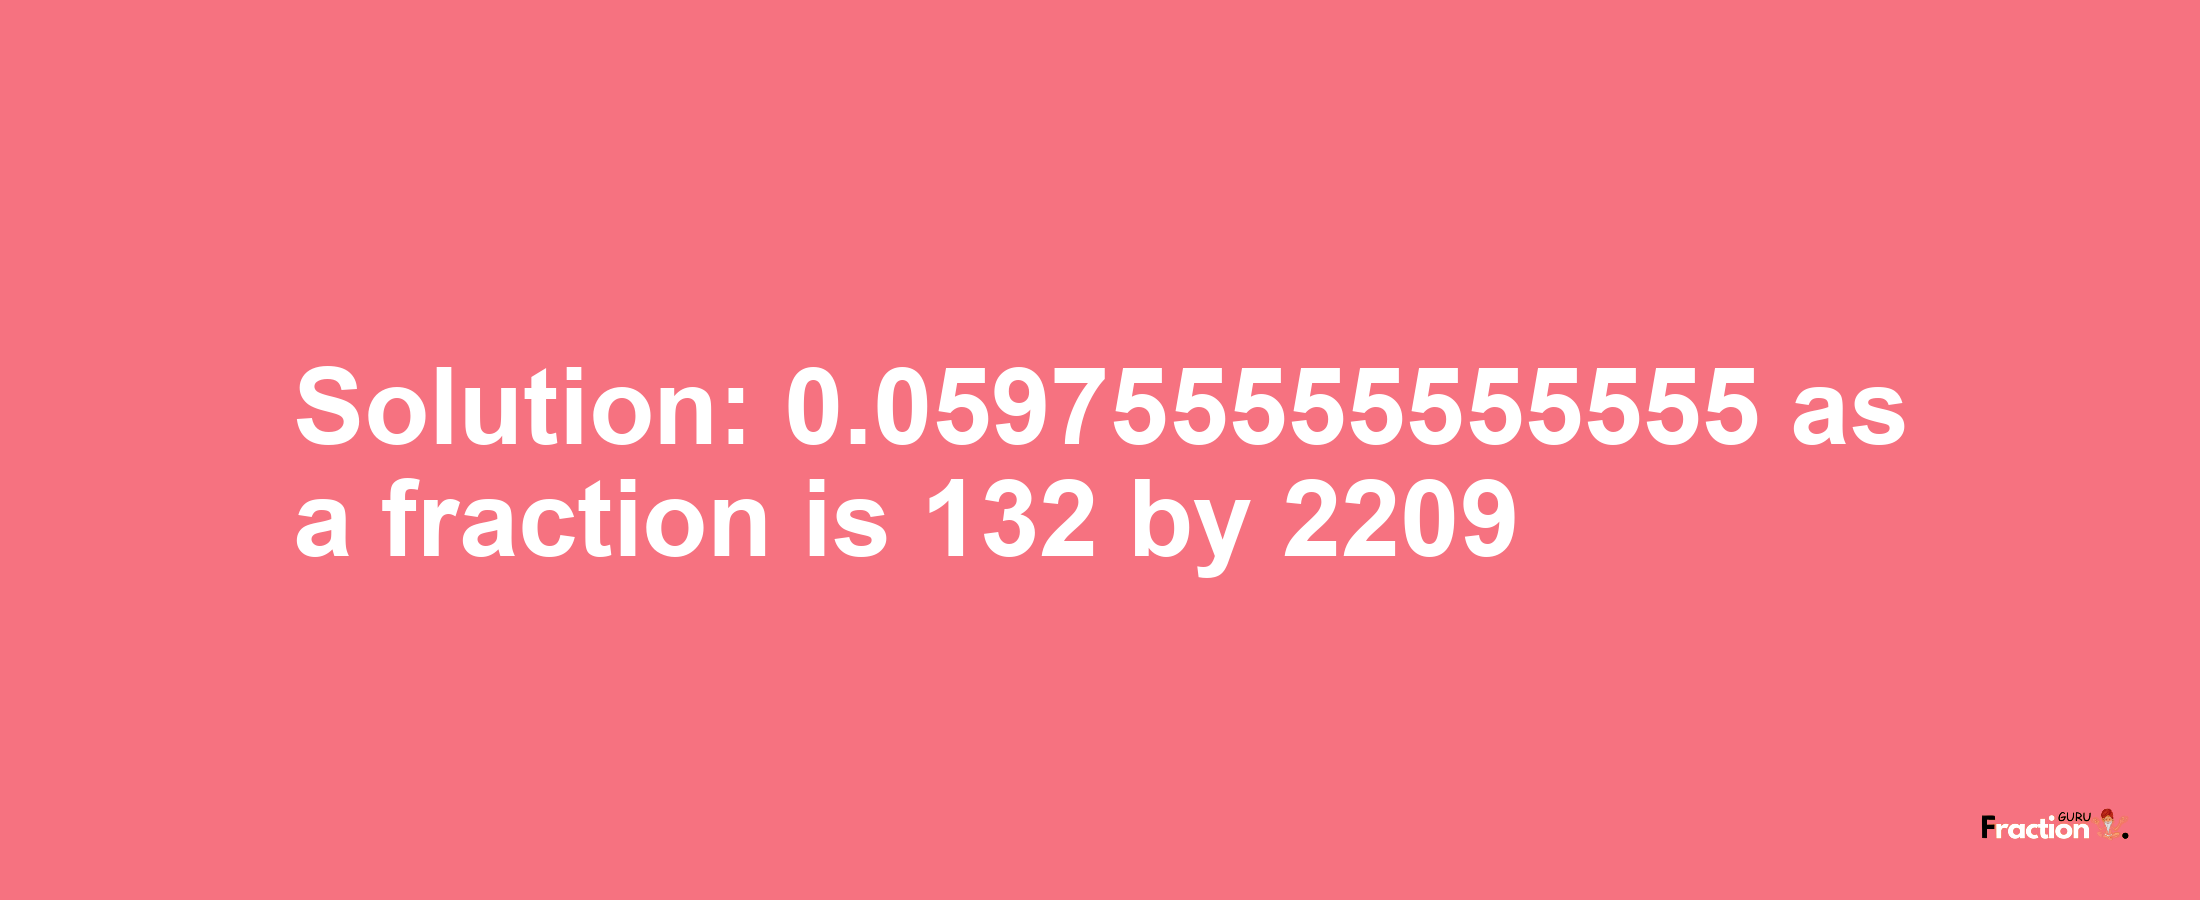 Solution:0.059755555555555 as a fraction is 132/2209